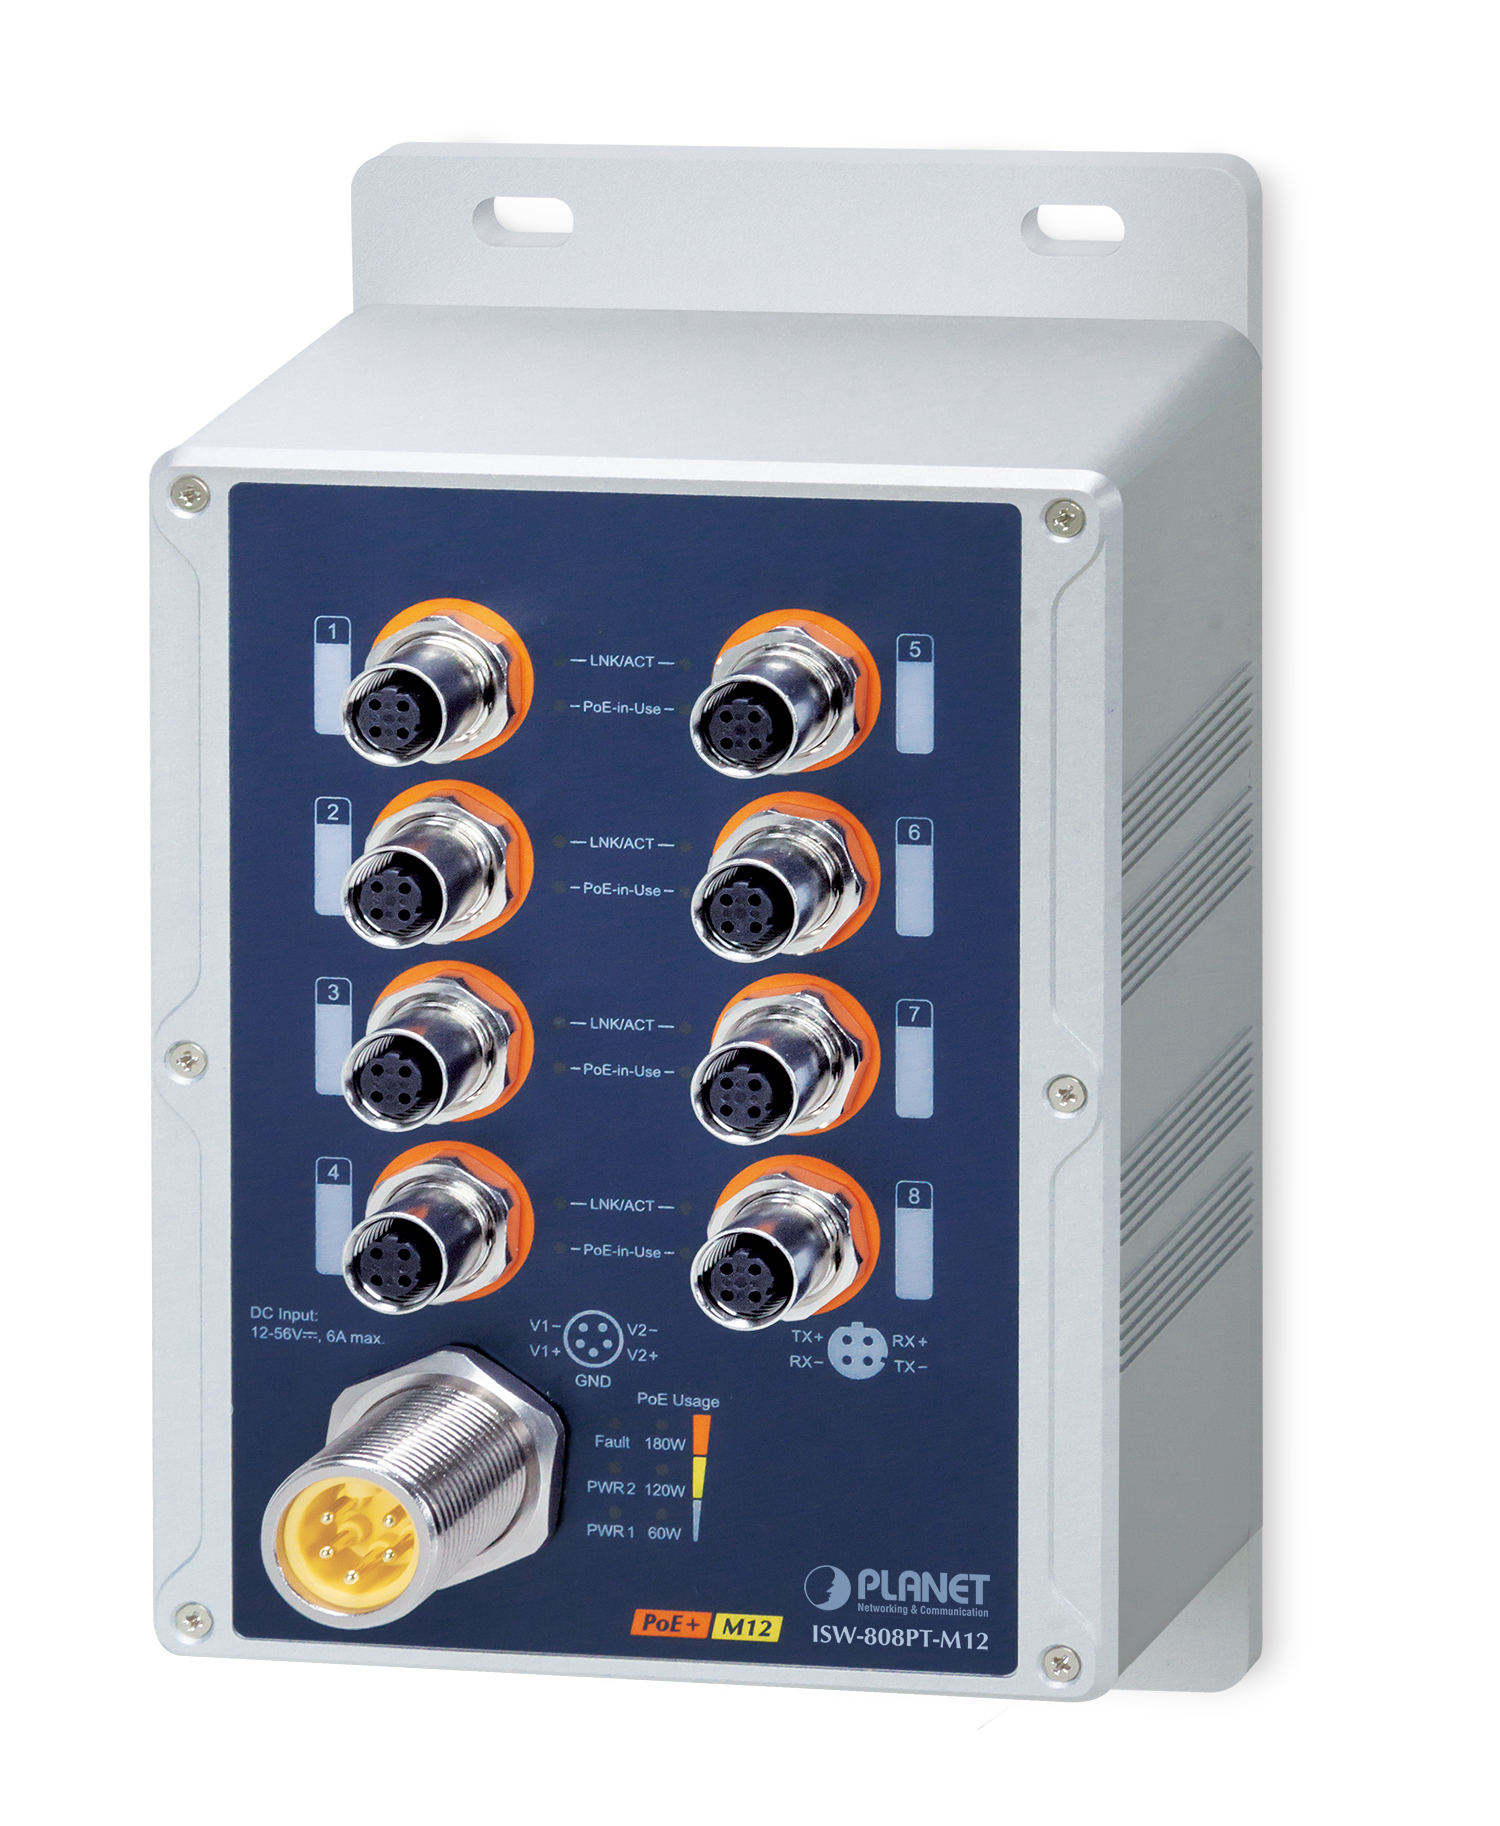 【ISW-808PT-M12】Industrial Water Proof IP67 8-Port 10/100TX M12 802.3at PoE+ Switch